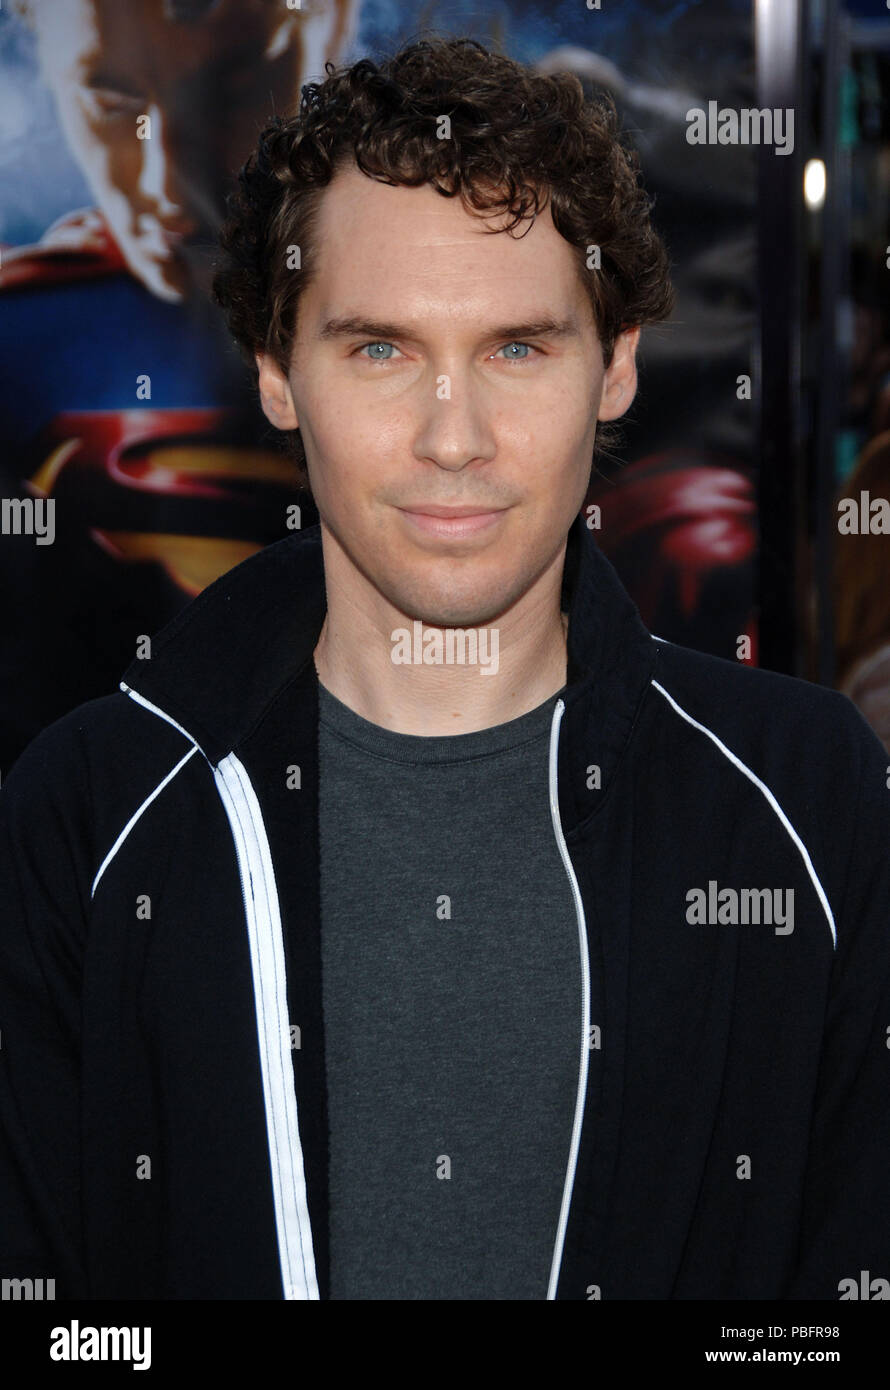 the director Bryan Singer arriving at the SUPERMAN RETURNS Premiere at the Westwood Village Theatre in Los Angeles. June 21, 2006.14 SingerBryan director 094 Red Carpet Event, Vertical, USA, Film Industry, Celebrities,  Photography, Bestof, Arts Culture and Entertainment, Topix Celebrities fashion /  Vertical, Best of, Event in Hollywood Life - California,  Red Carpet and backstage, USA, Film Industry, Celebrities,  movie celebrities, TV celebrities, Music celebrities, Photography, Bestof, Arts Culture and Entertainment,  Topix, headshot, vertical, one person,, from the year , 2006, inquiry ts Stock Photo